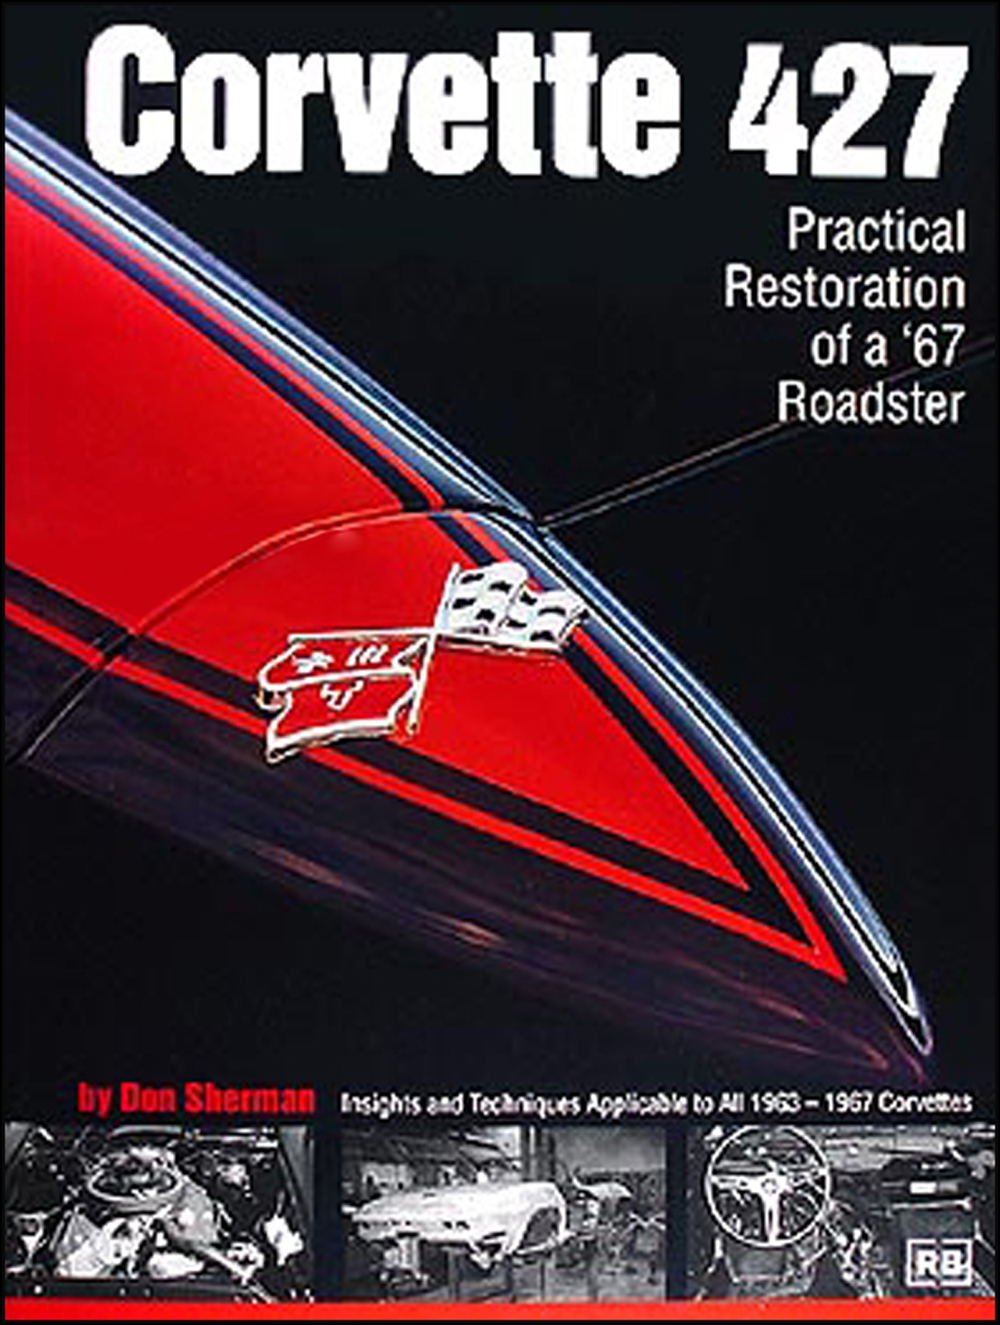 Corvette 427 Practical Restoration Guide From A to Z 1963-1967